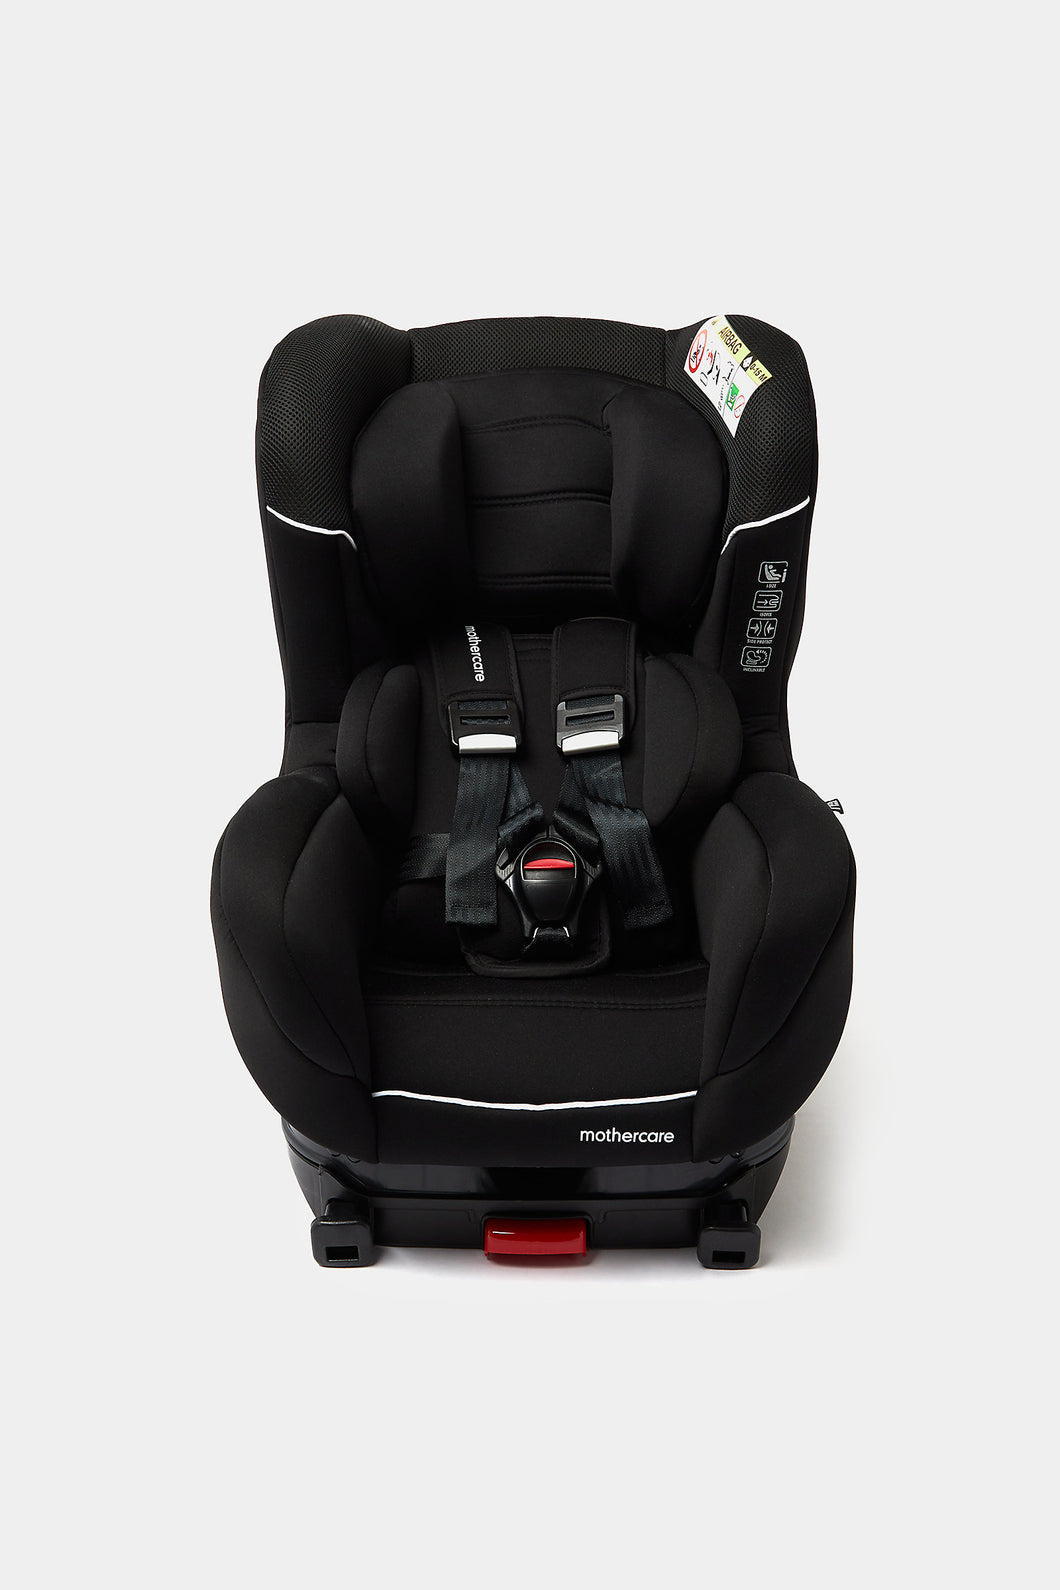 Mothercare Adelaide i-Size Combination Car Seat